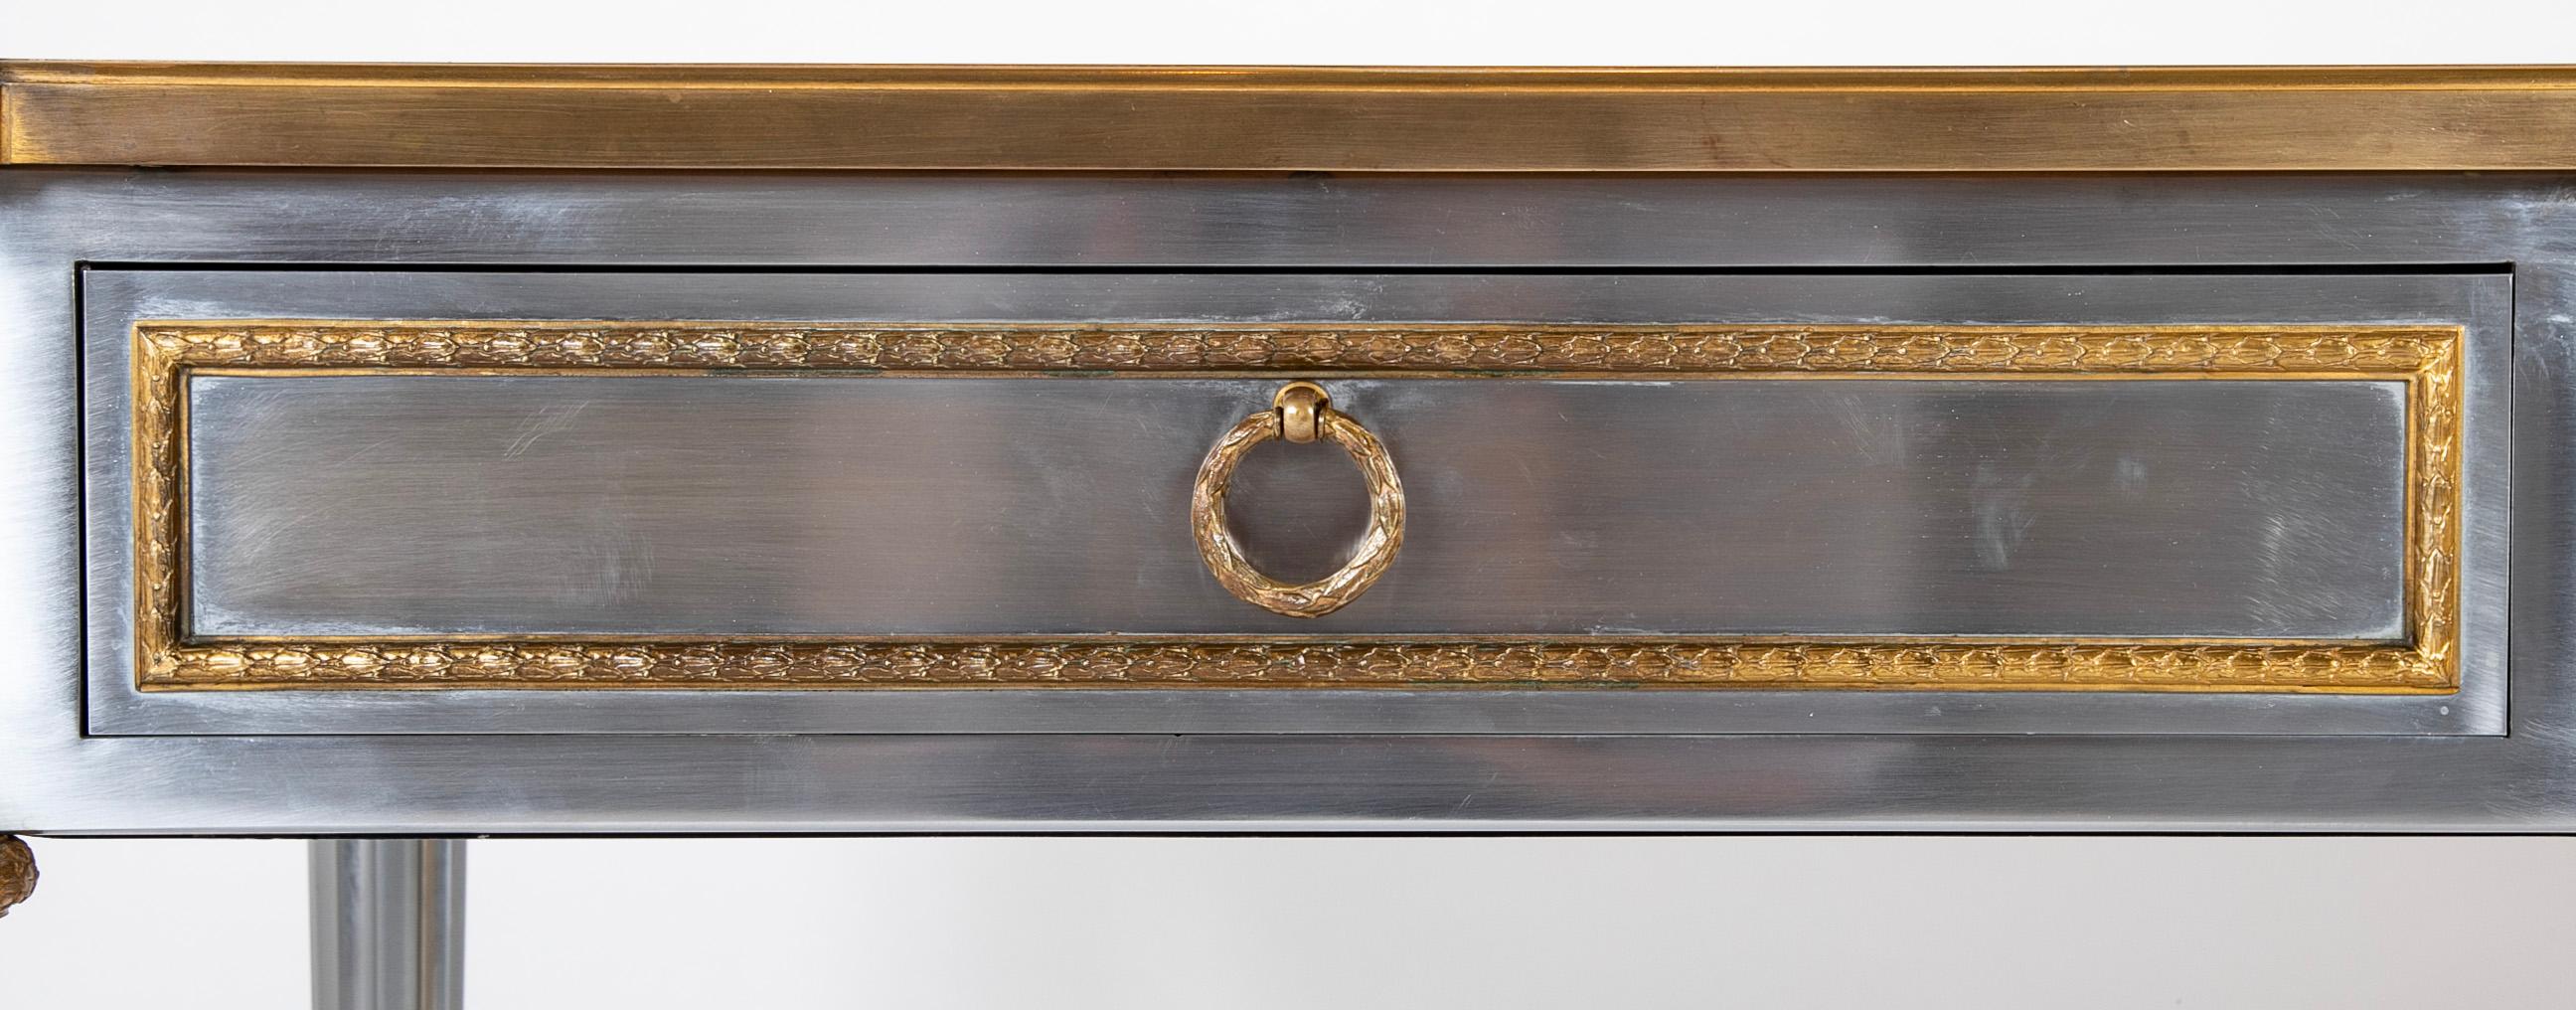 20th Century Louis XVI Style Desk By John Vesey  For Sale